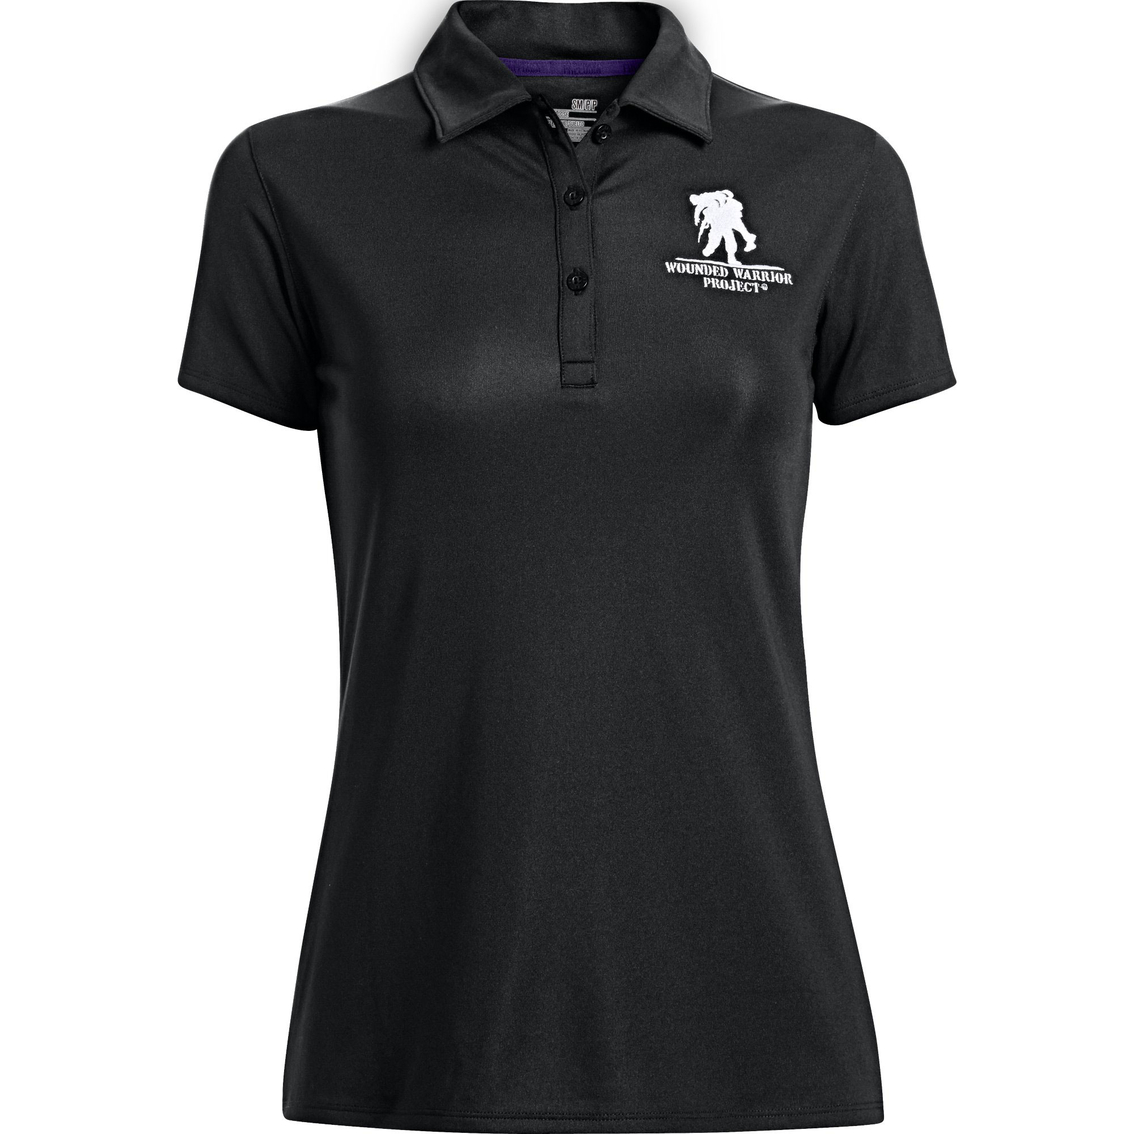 wounded warrior project polo shirts